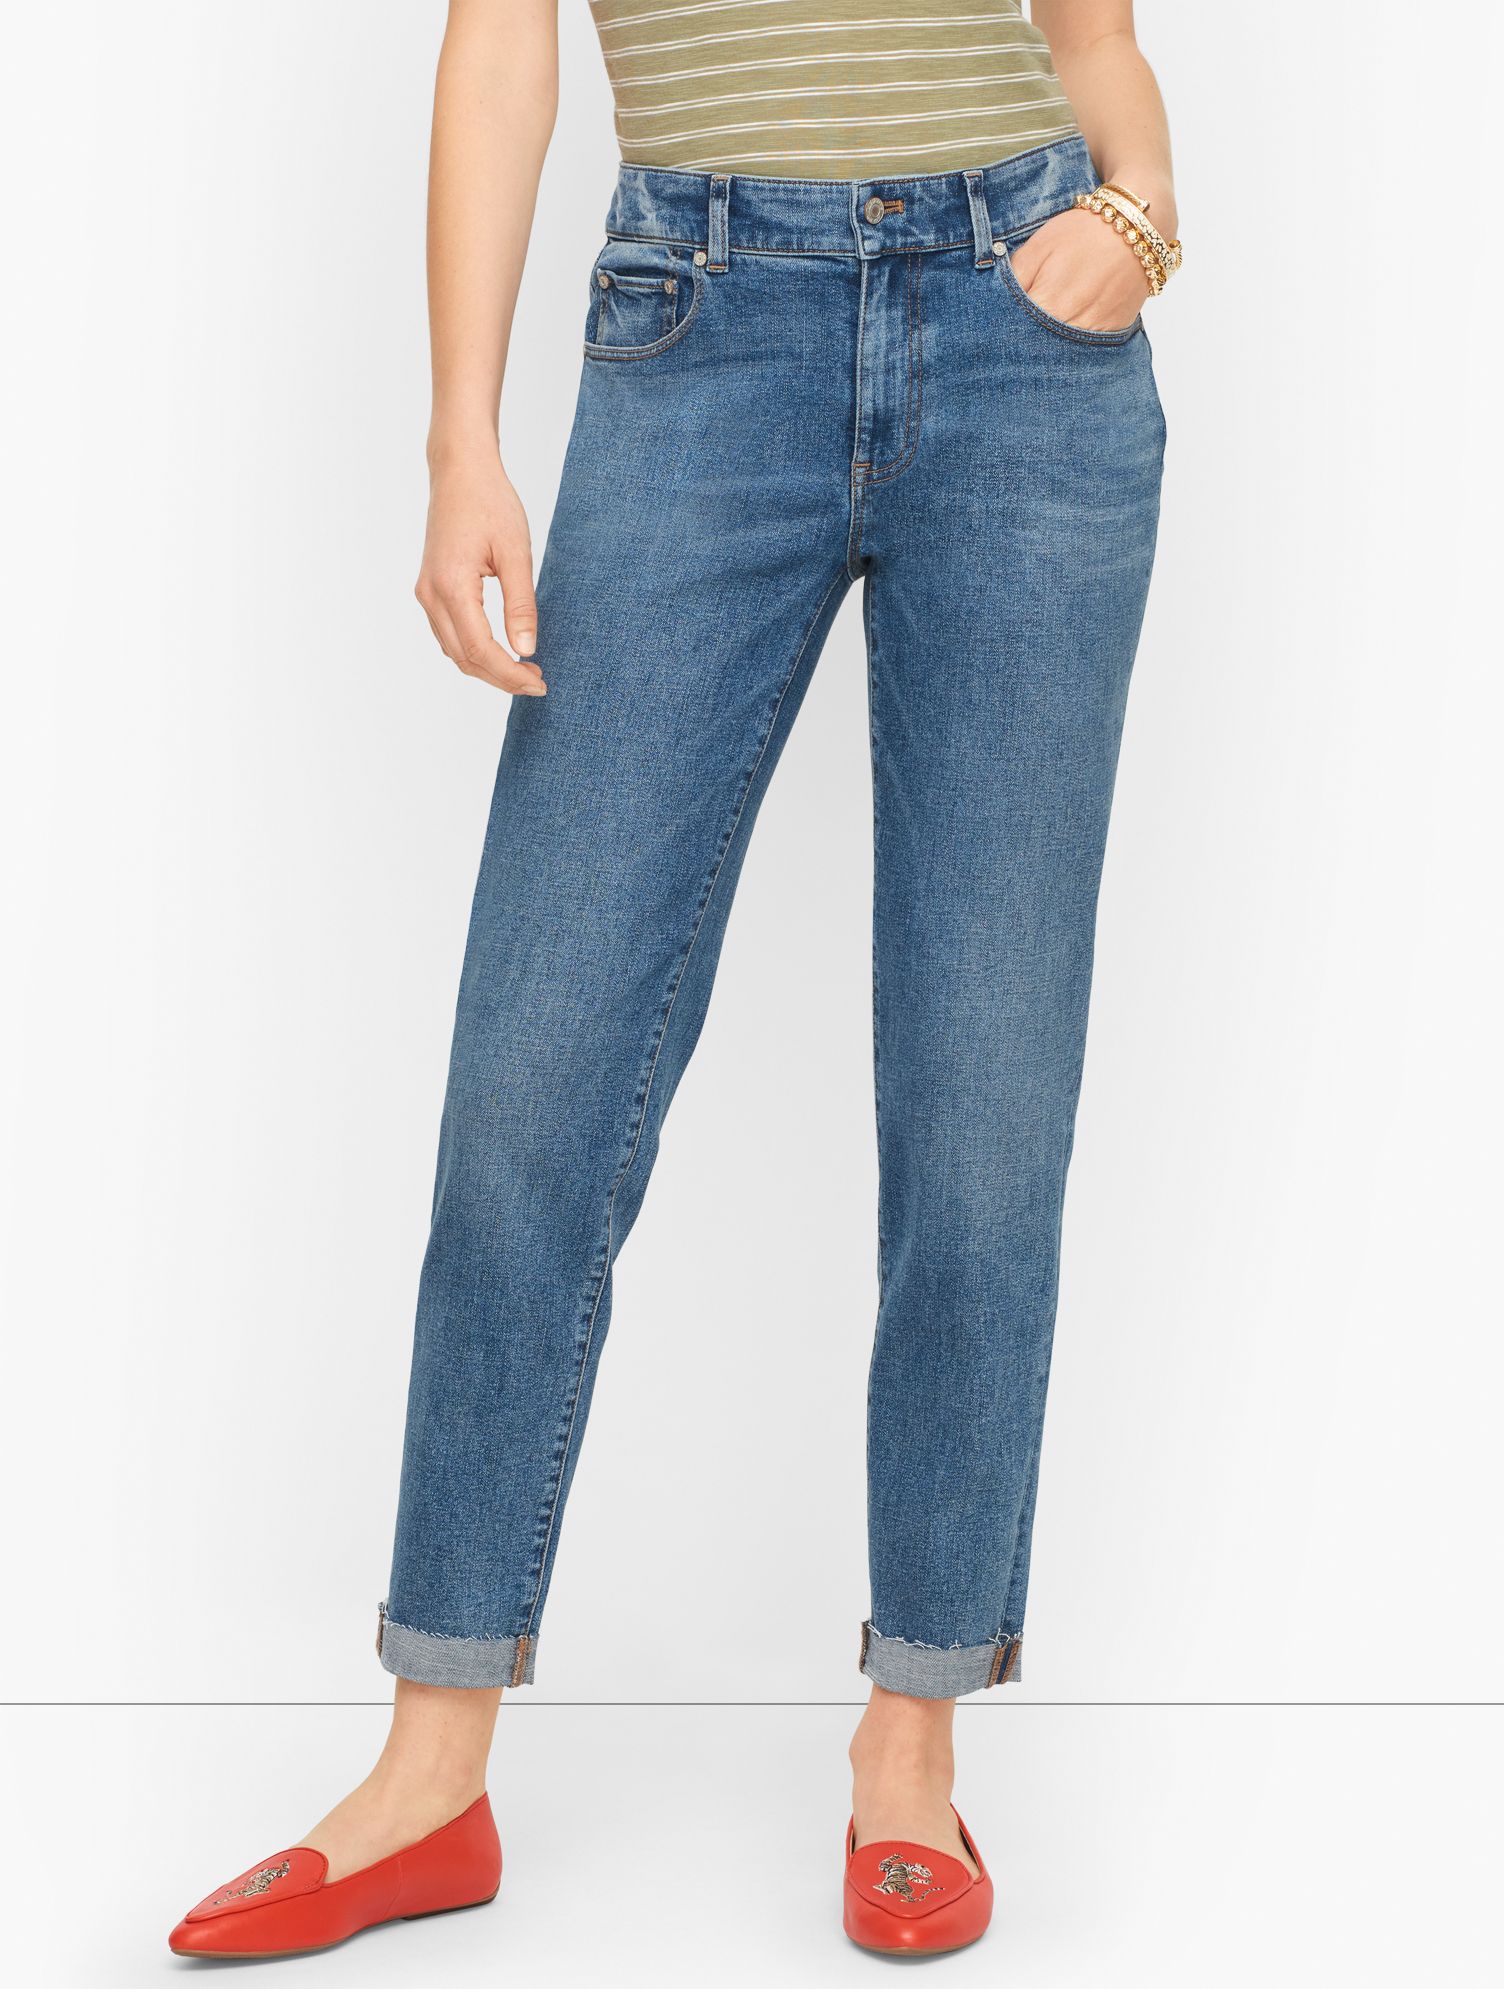 Everyday Relaxed Jeans - Eventide Wash - 18 Talbots | Talbots